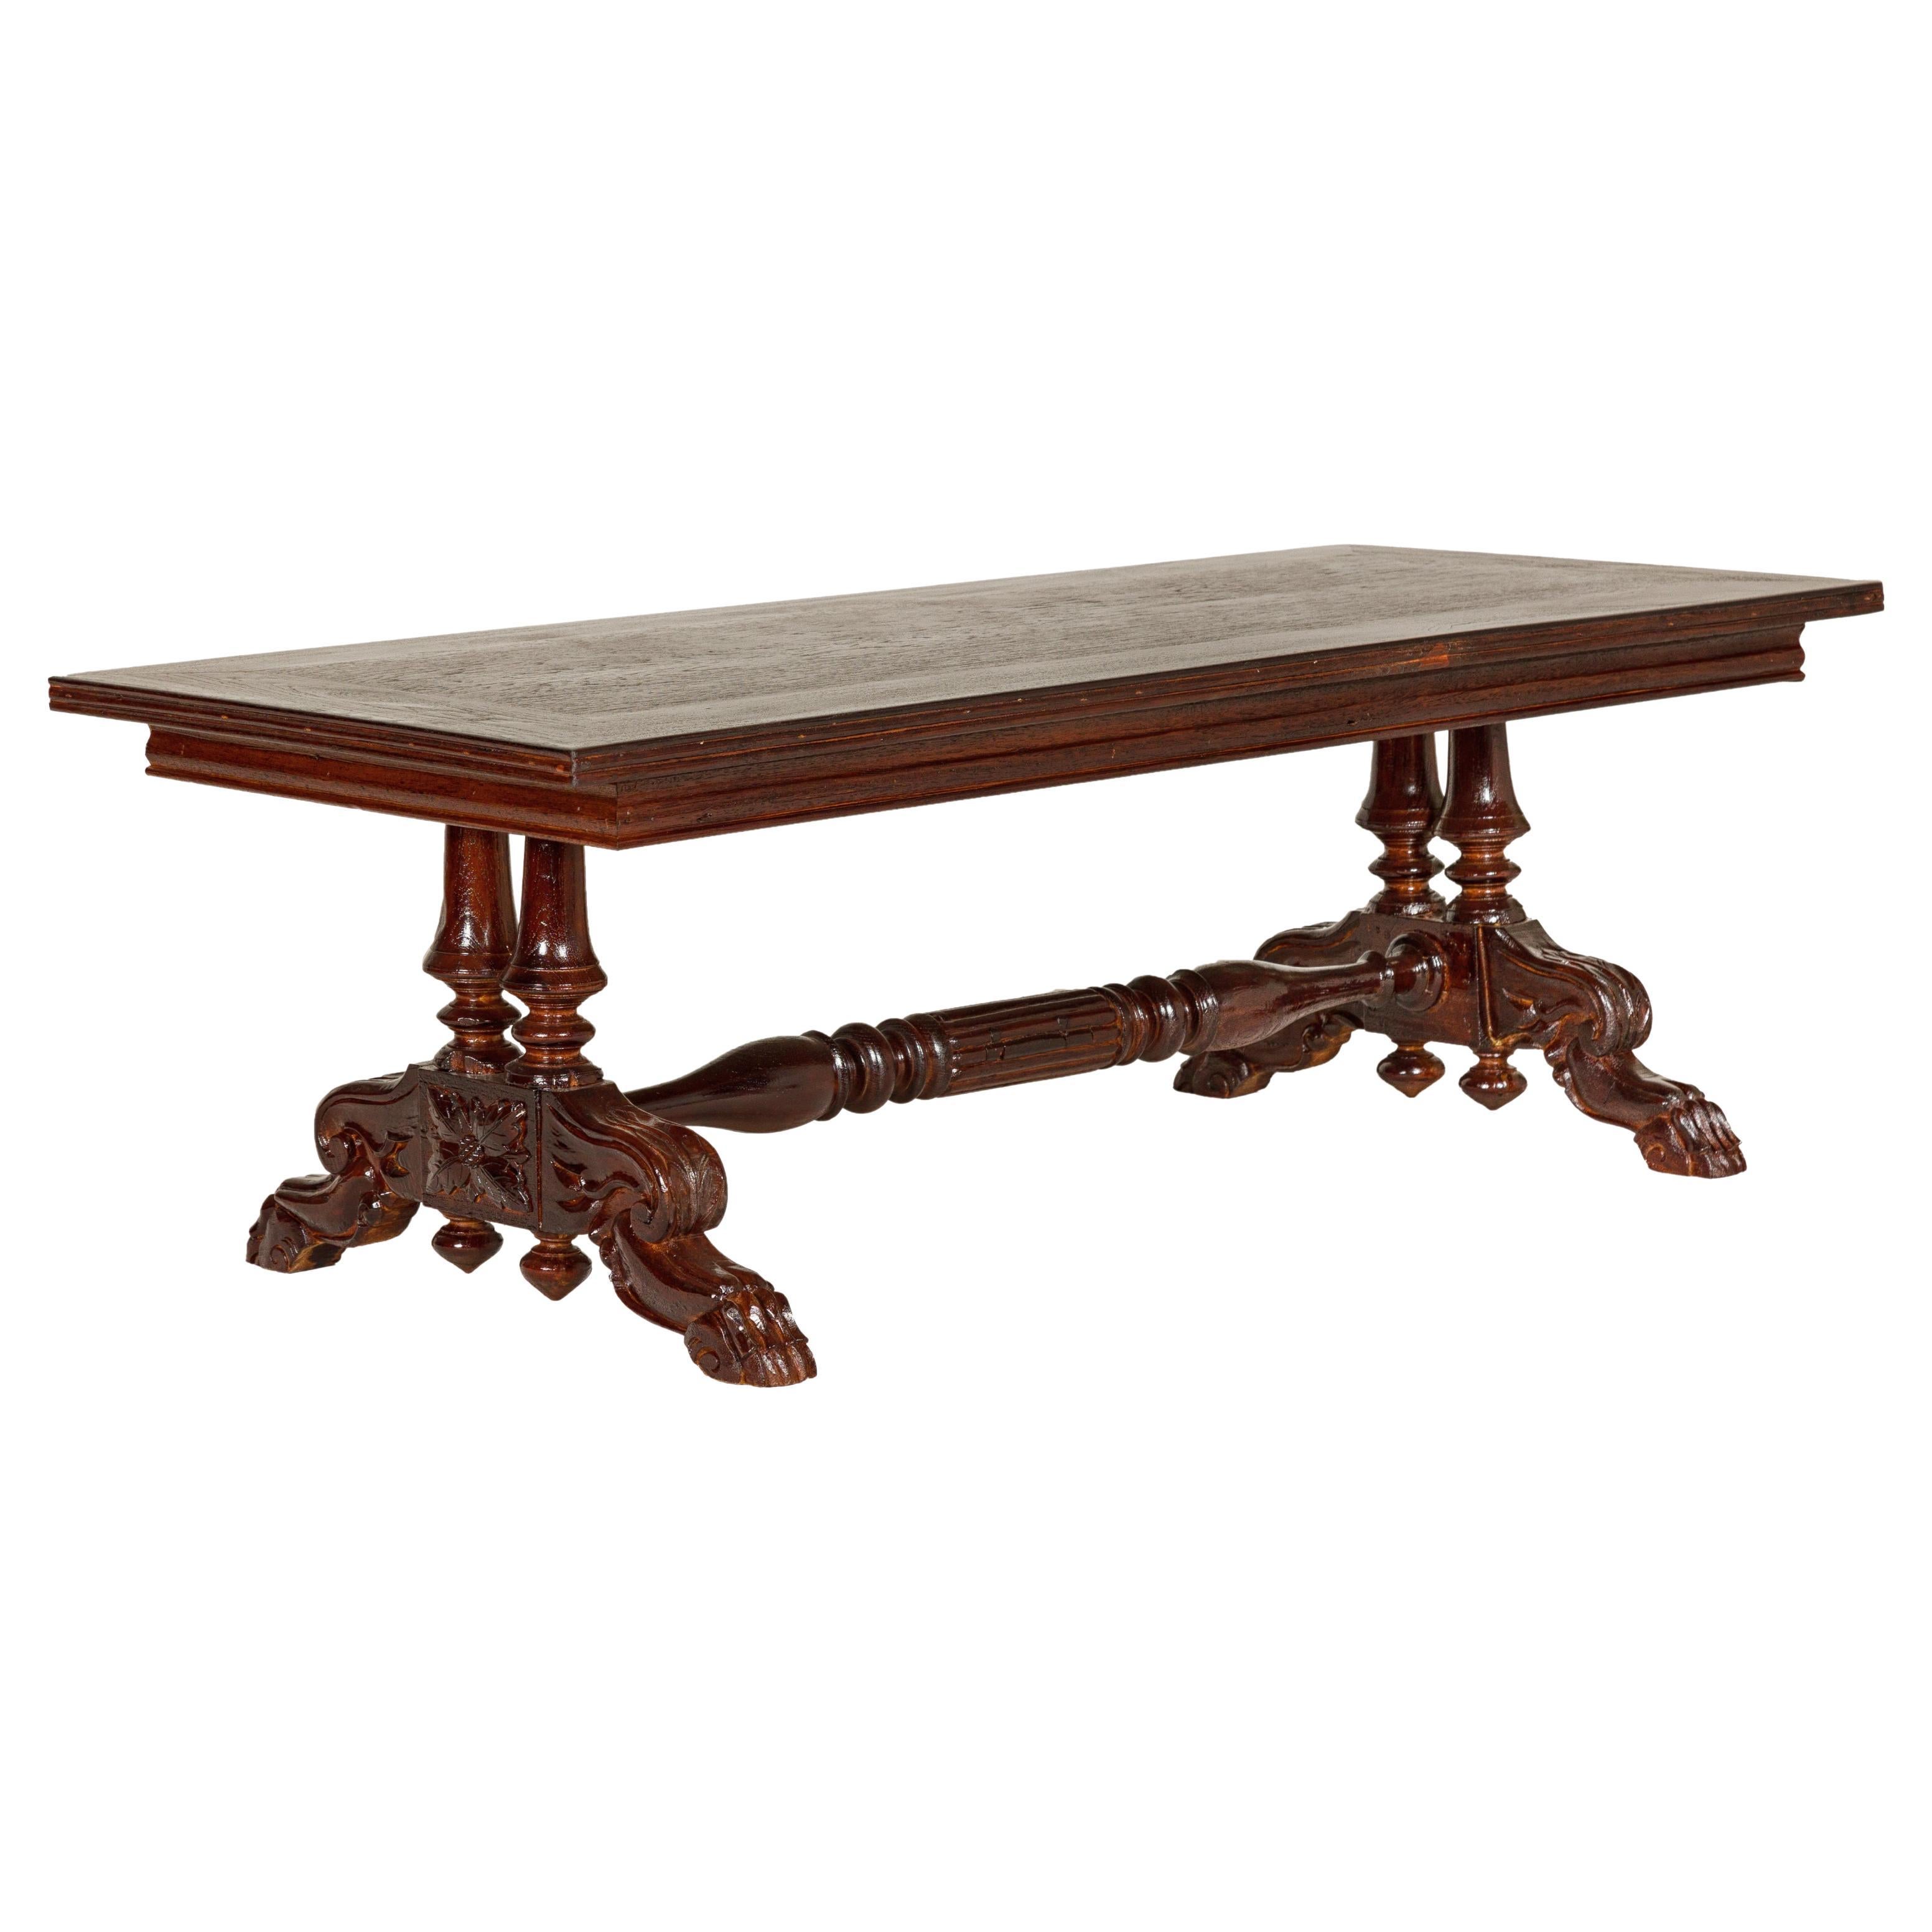 Dutch Colonial Ornate Coffee Table with Carved Lion Paw Legs and Cross Stretcher For Sale